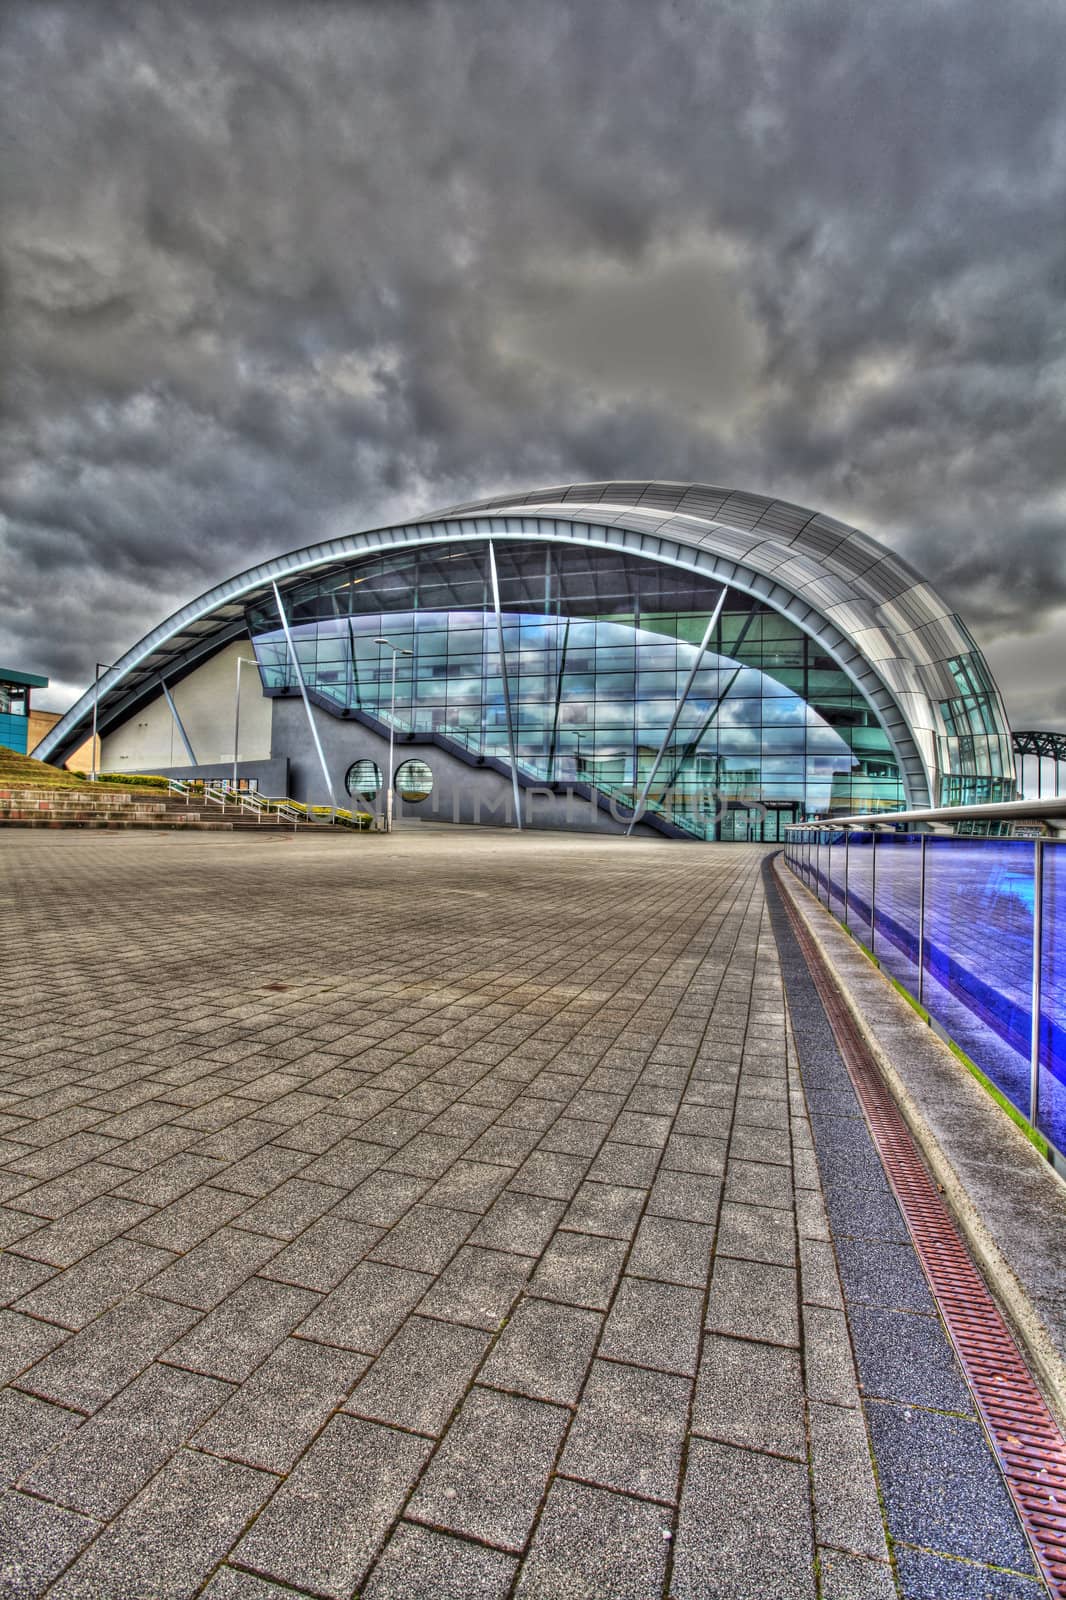 The Sage Building in Newcastle Upon Tyne by olliemt